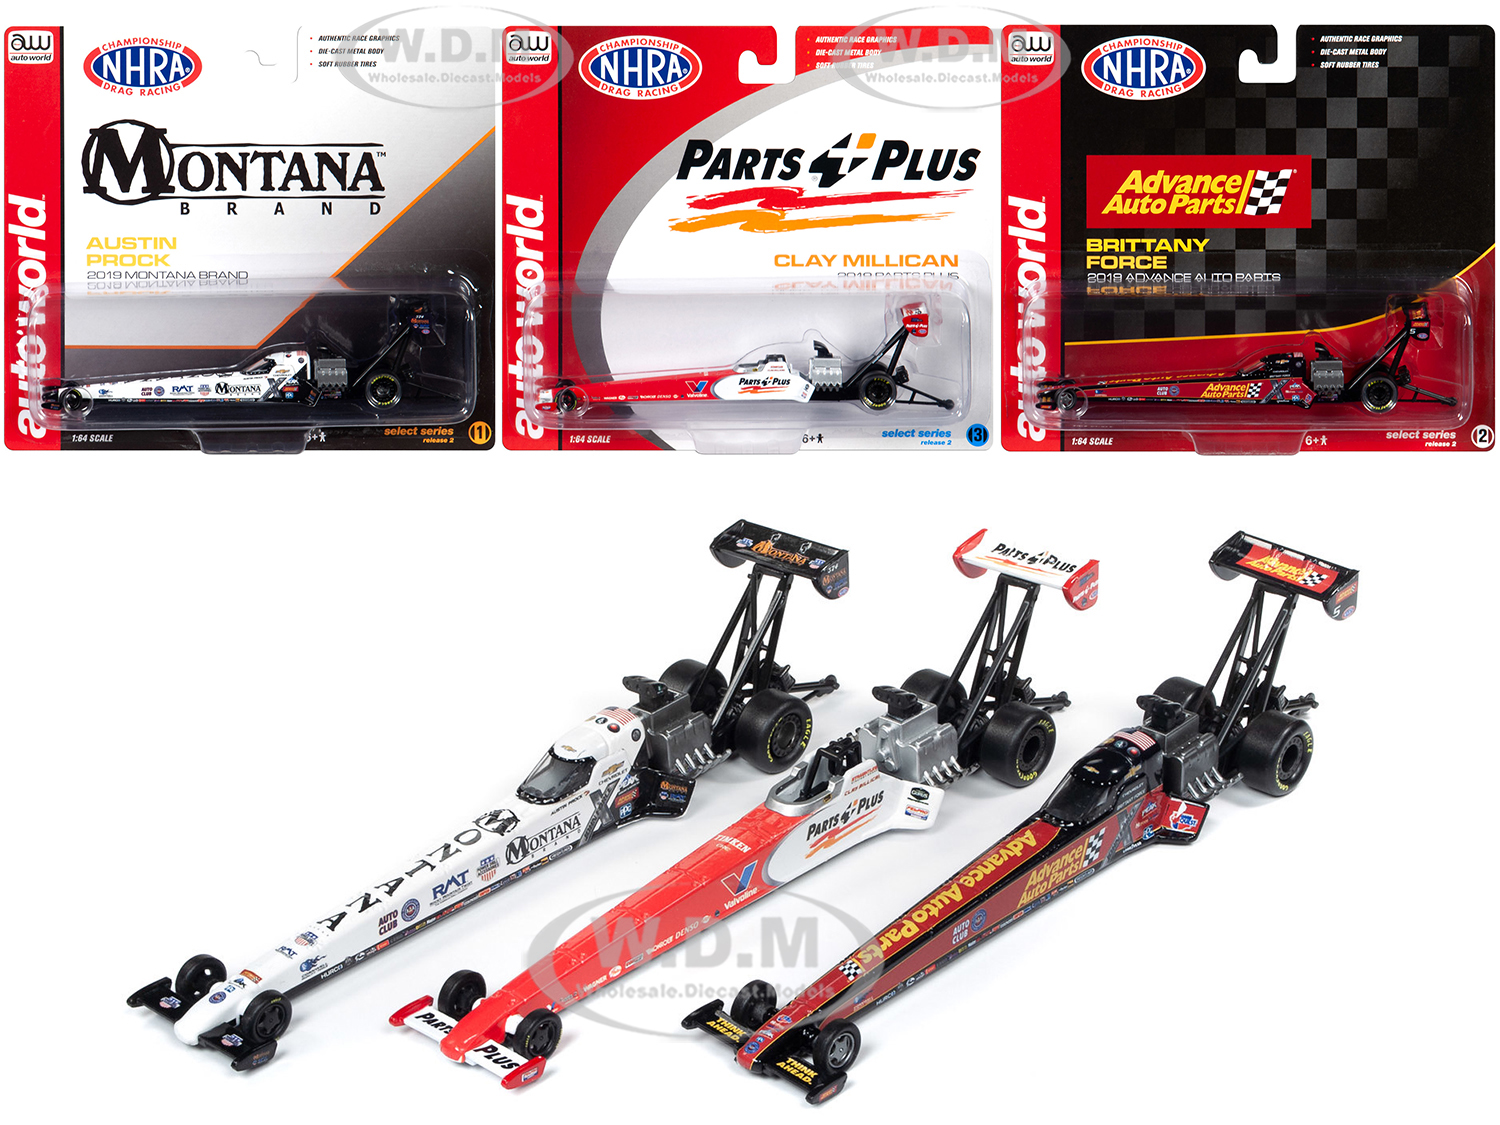 2019 Nhra Tfd (top Fuel Dragster) Release 2 Set Of 3 Pieces 1/64 Diecast Model Cars By Autoworld